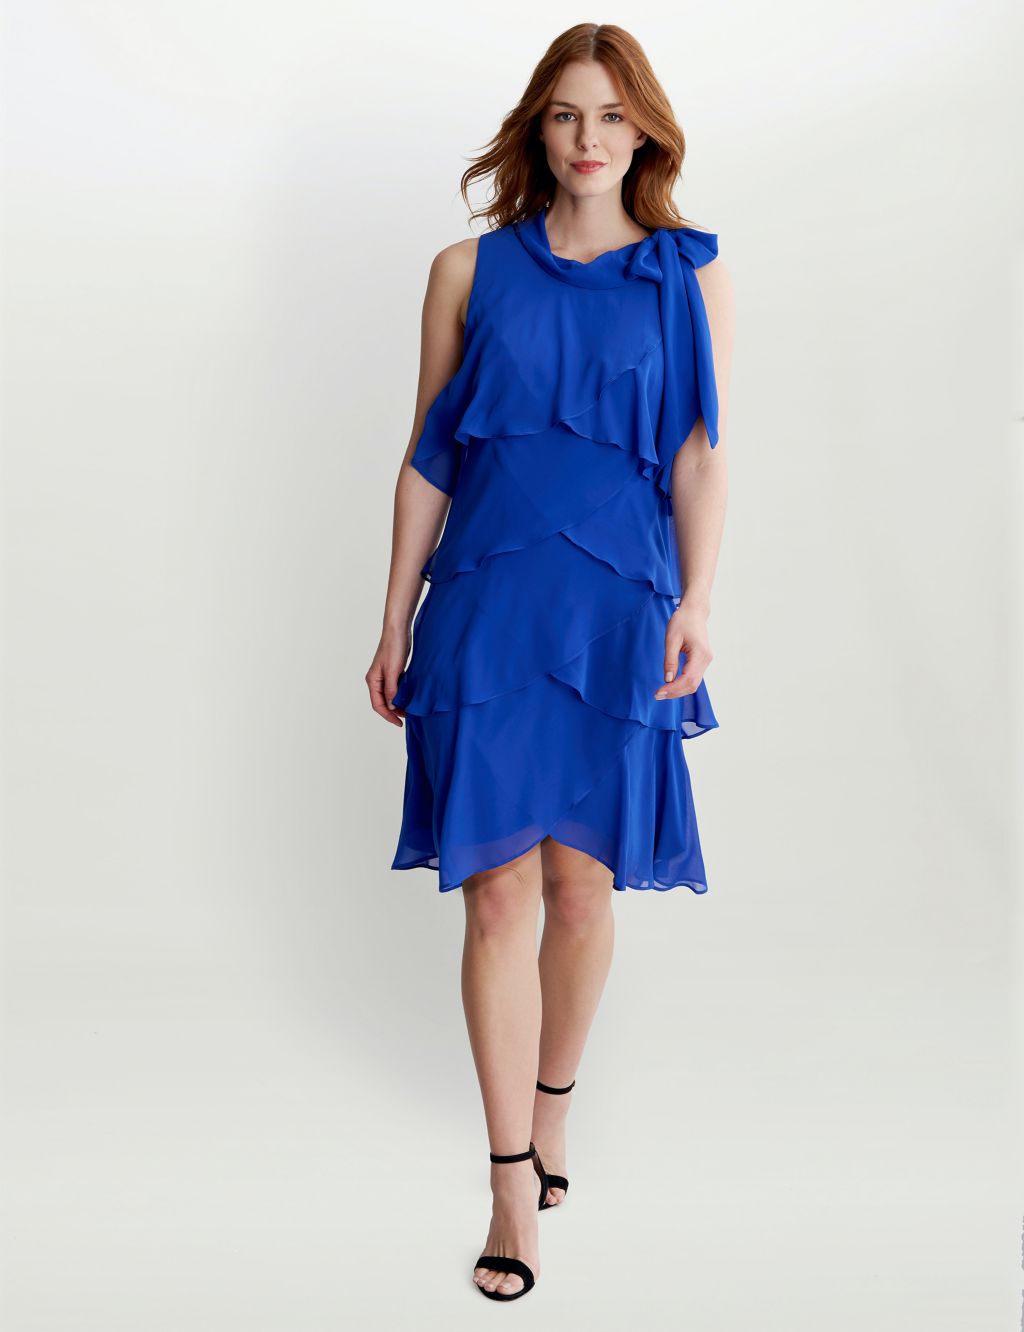 Round Neck Knee Length Tiered Shift Dress image 3